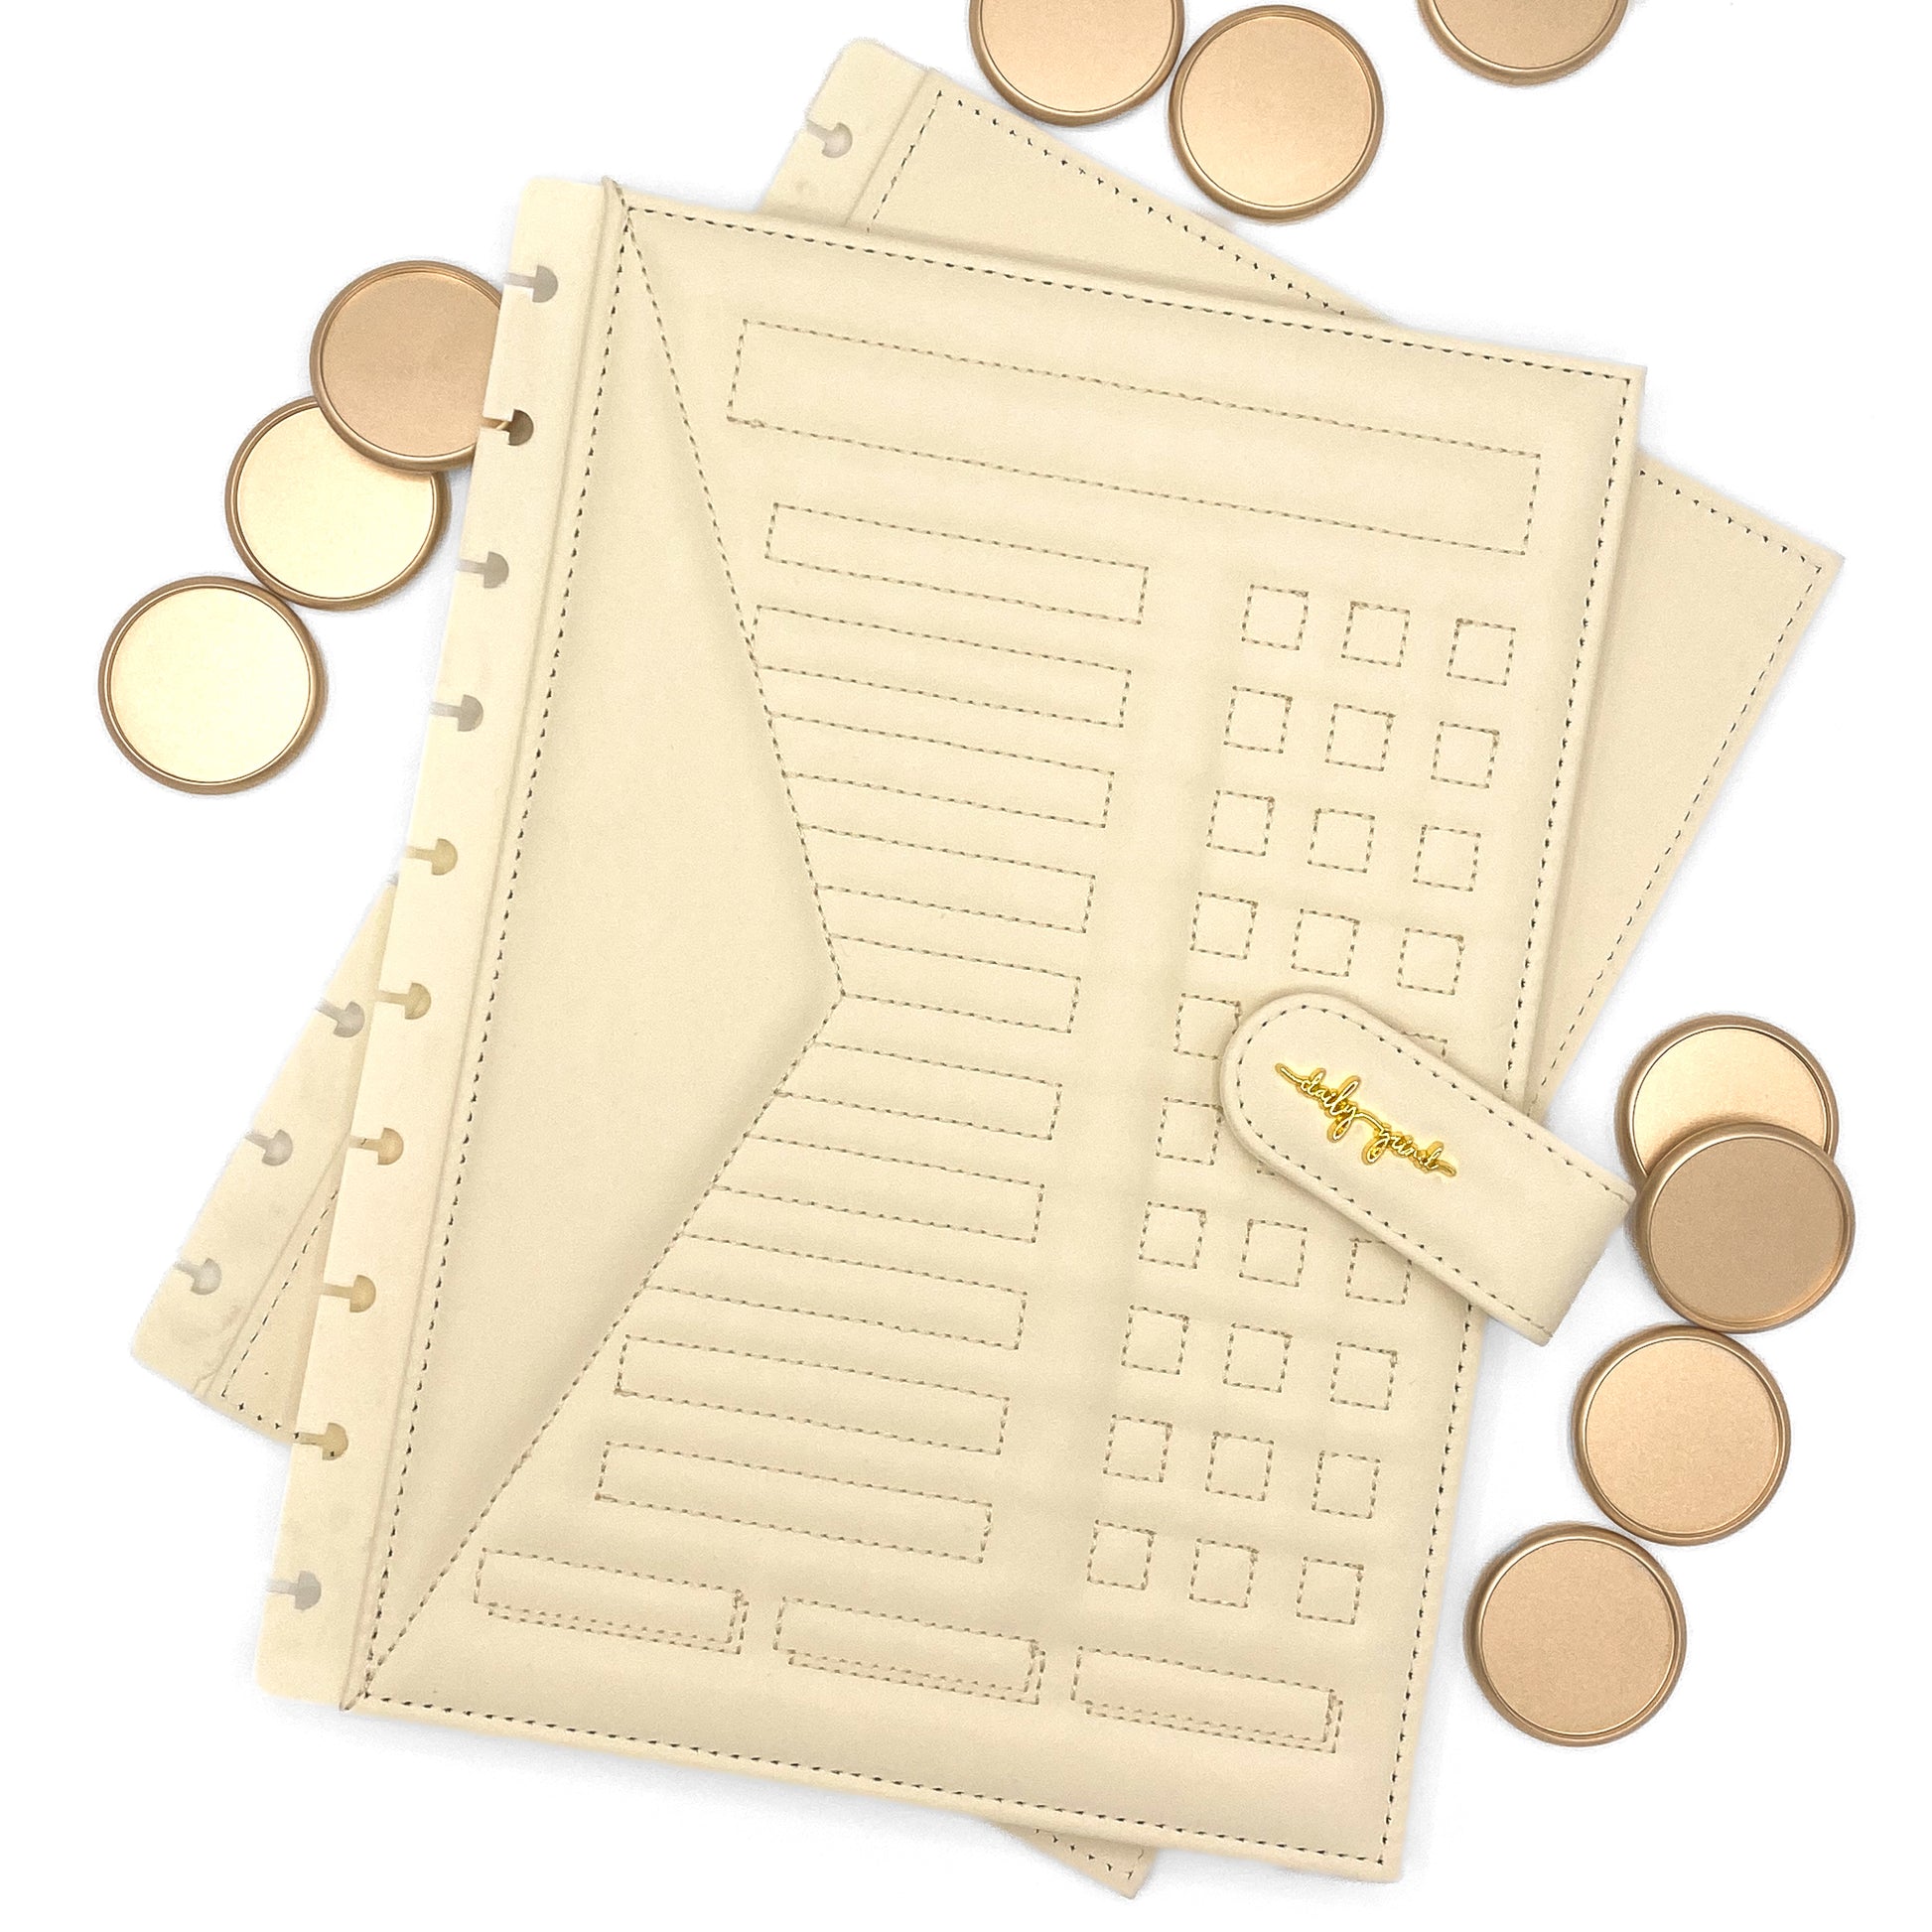 Cream faux leather planner and gold discs